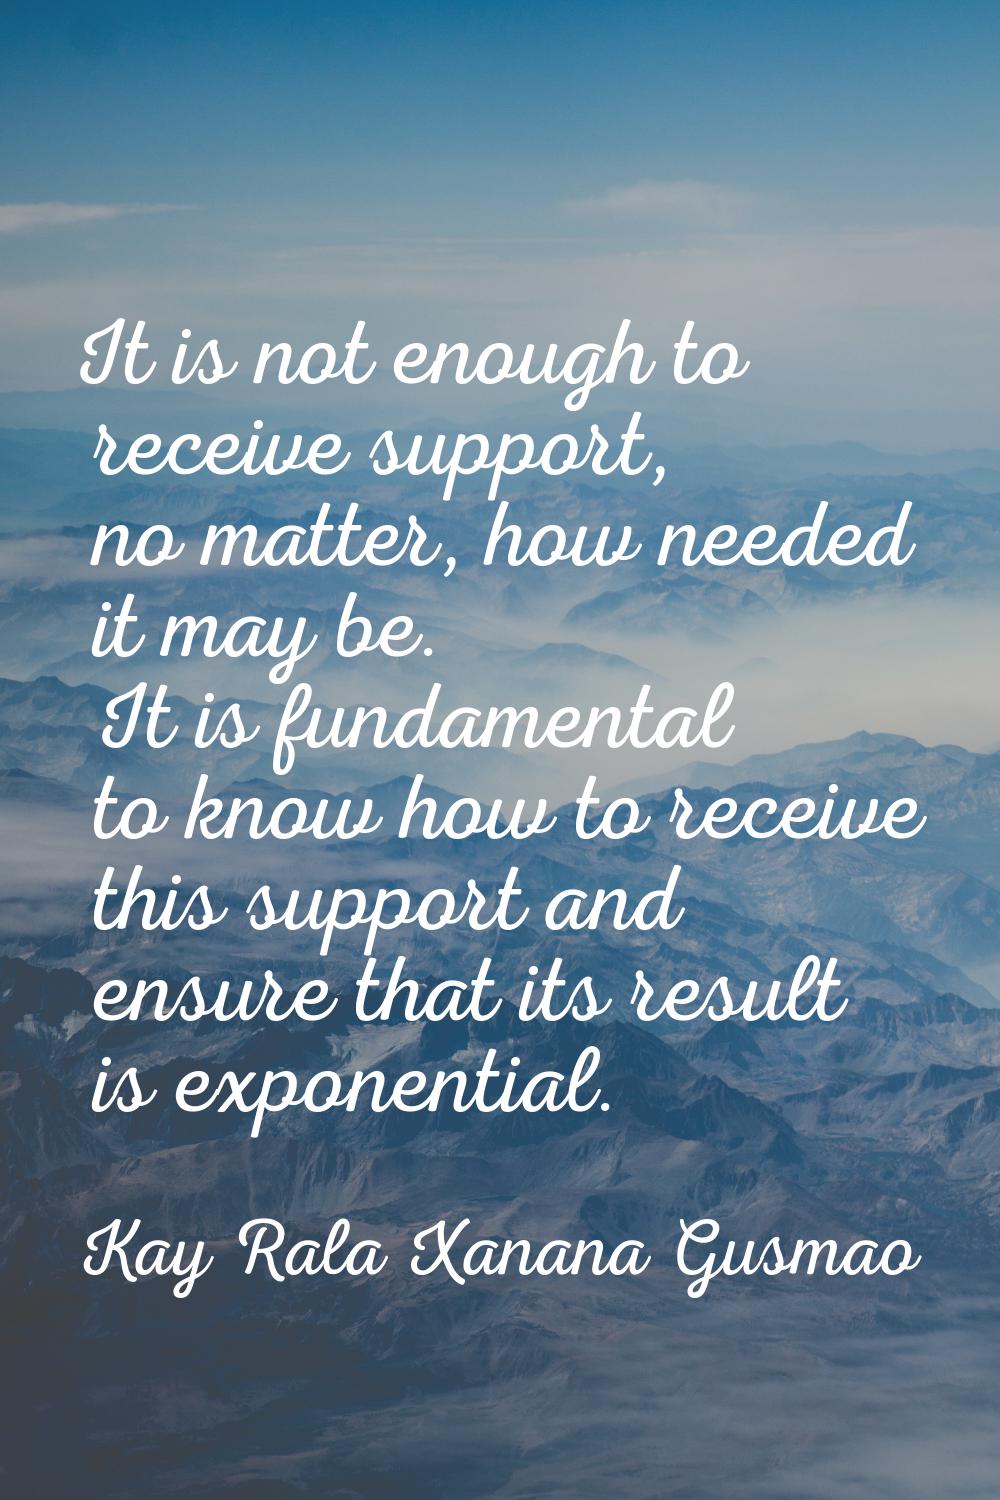 It is not enough to receive support, no matter, how needed it may be. It is fundamental to know how